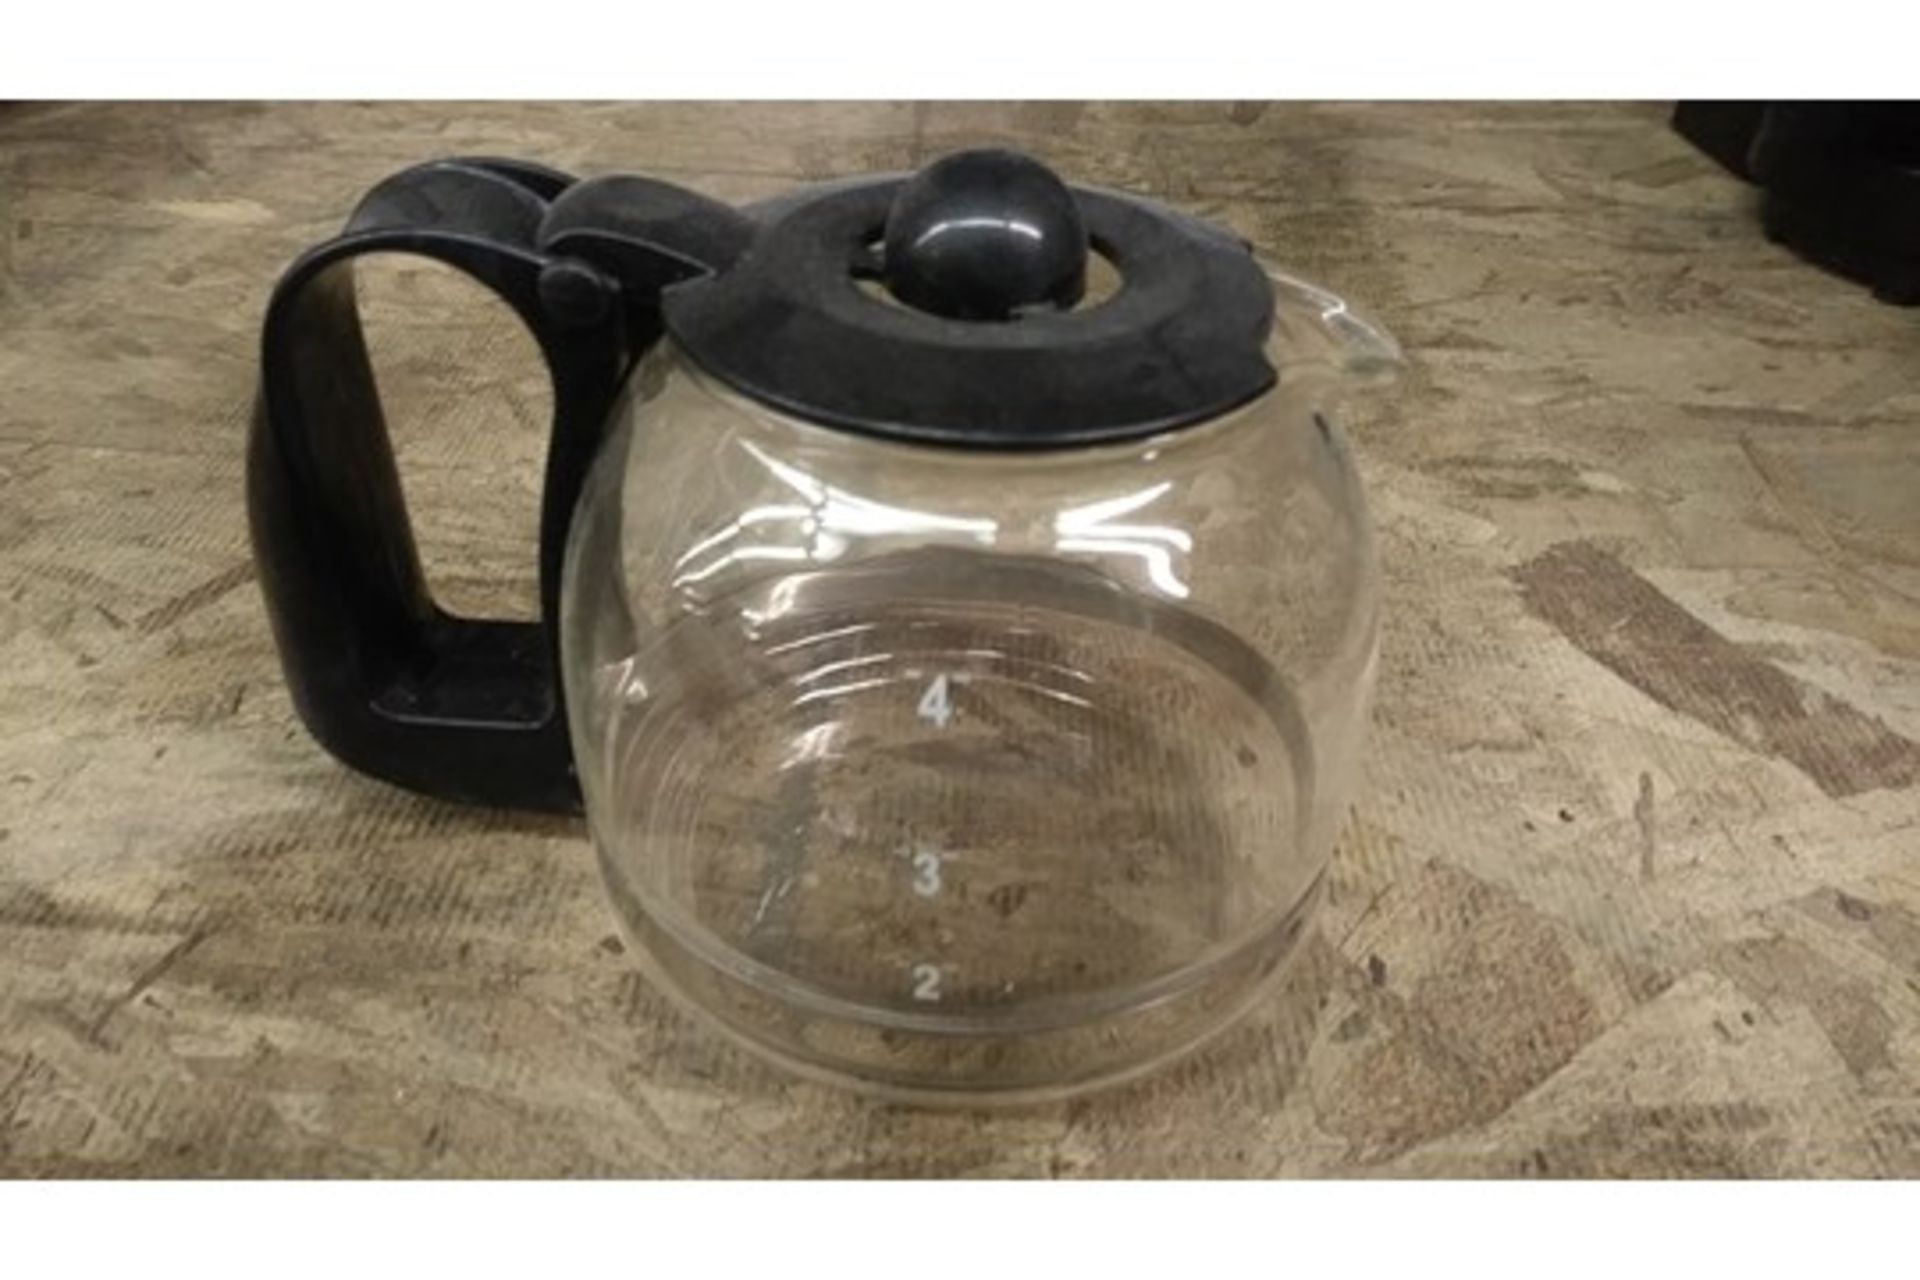 HAMILTON BEACH COMMERCIAL 4 - CUP GLASS CARAFE (INCLUDES QTY 24)